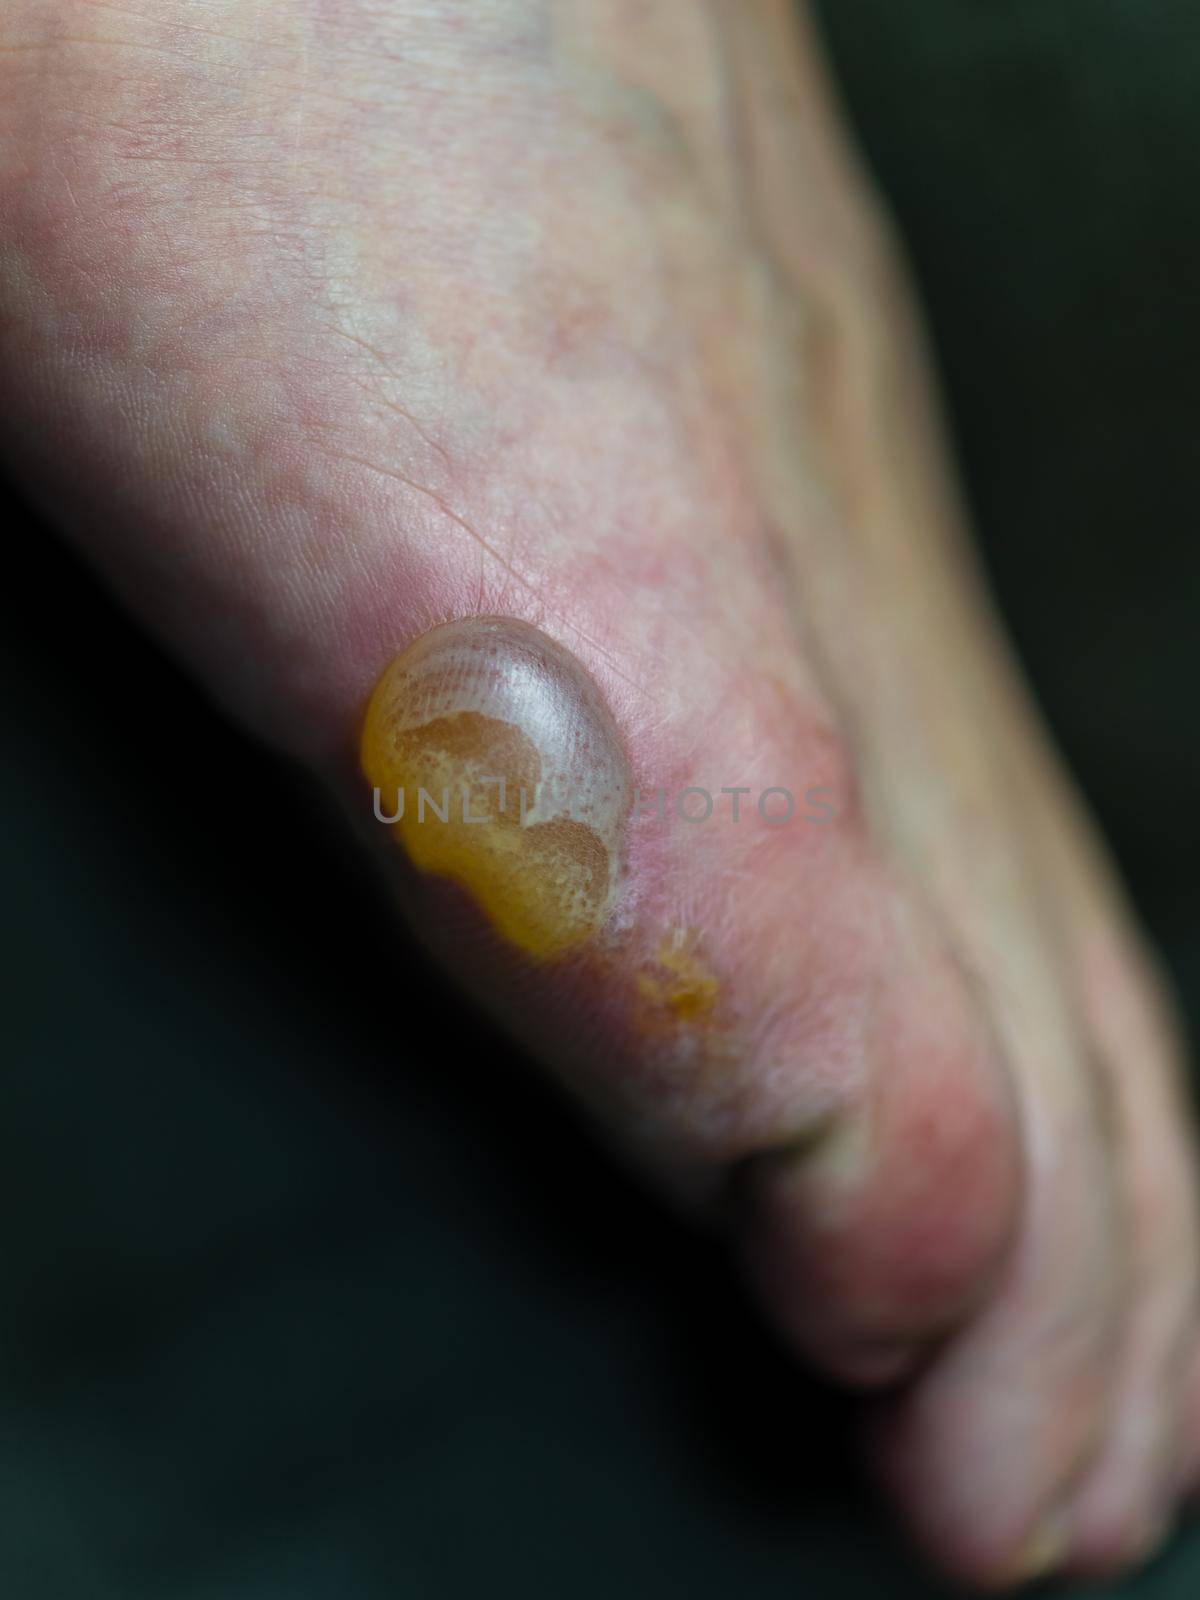 Big blister and flaking skin on foot from Pompholyx eczema